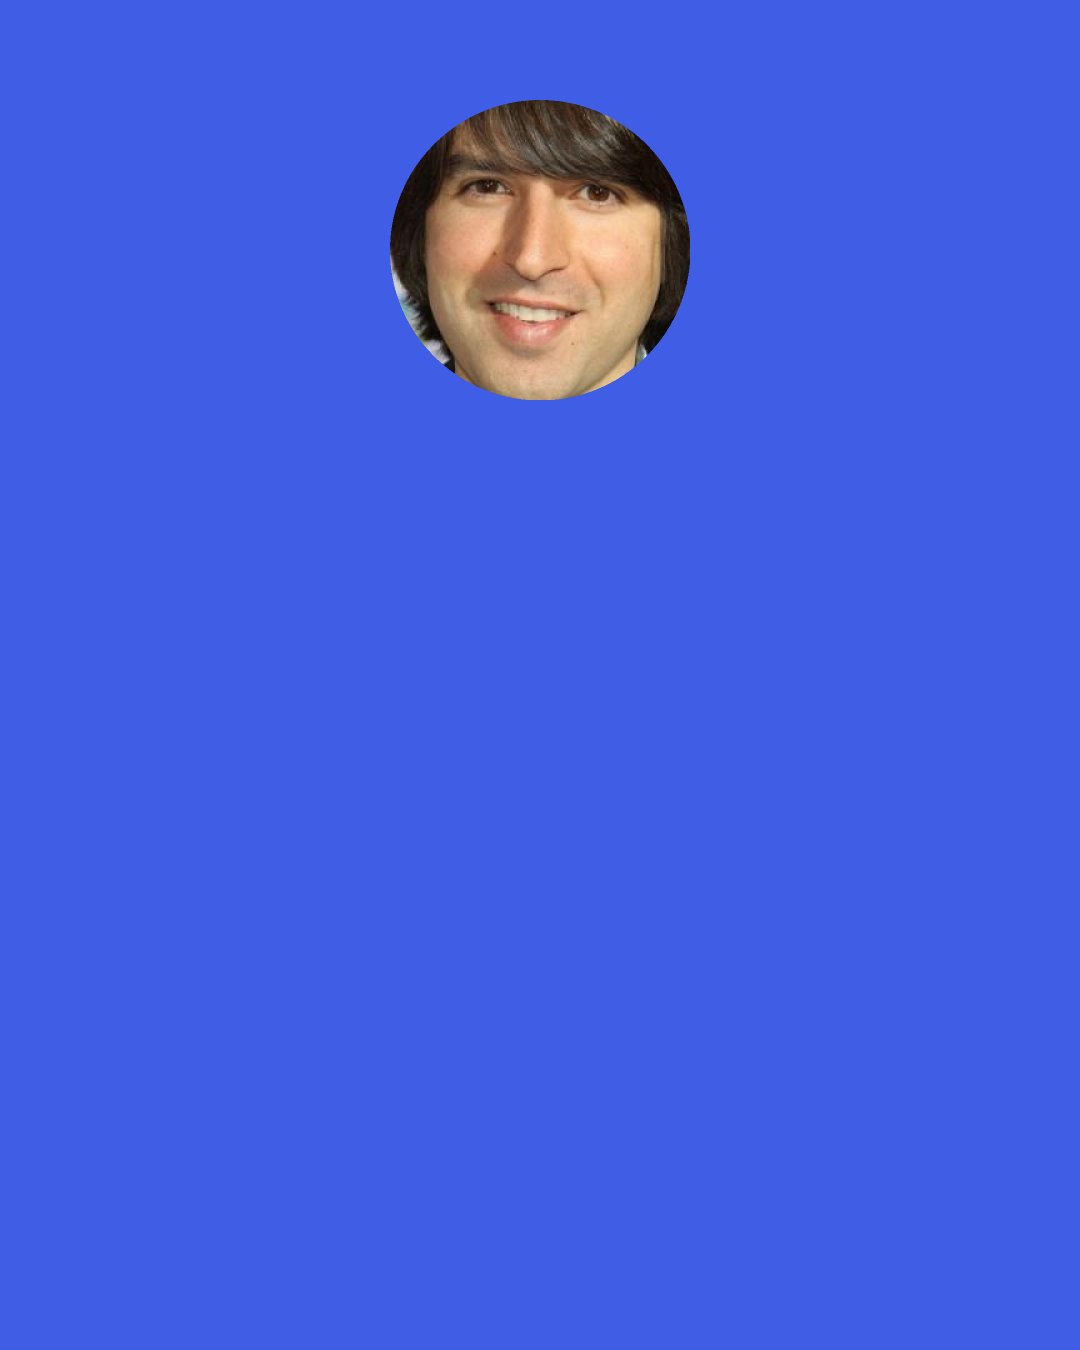 Demetri Martin: I was in my friends garage, and he had; a kite, a yo-yo, and a boomerang. I was like "Dude, you have abandonment issues"